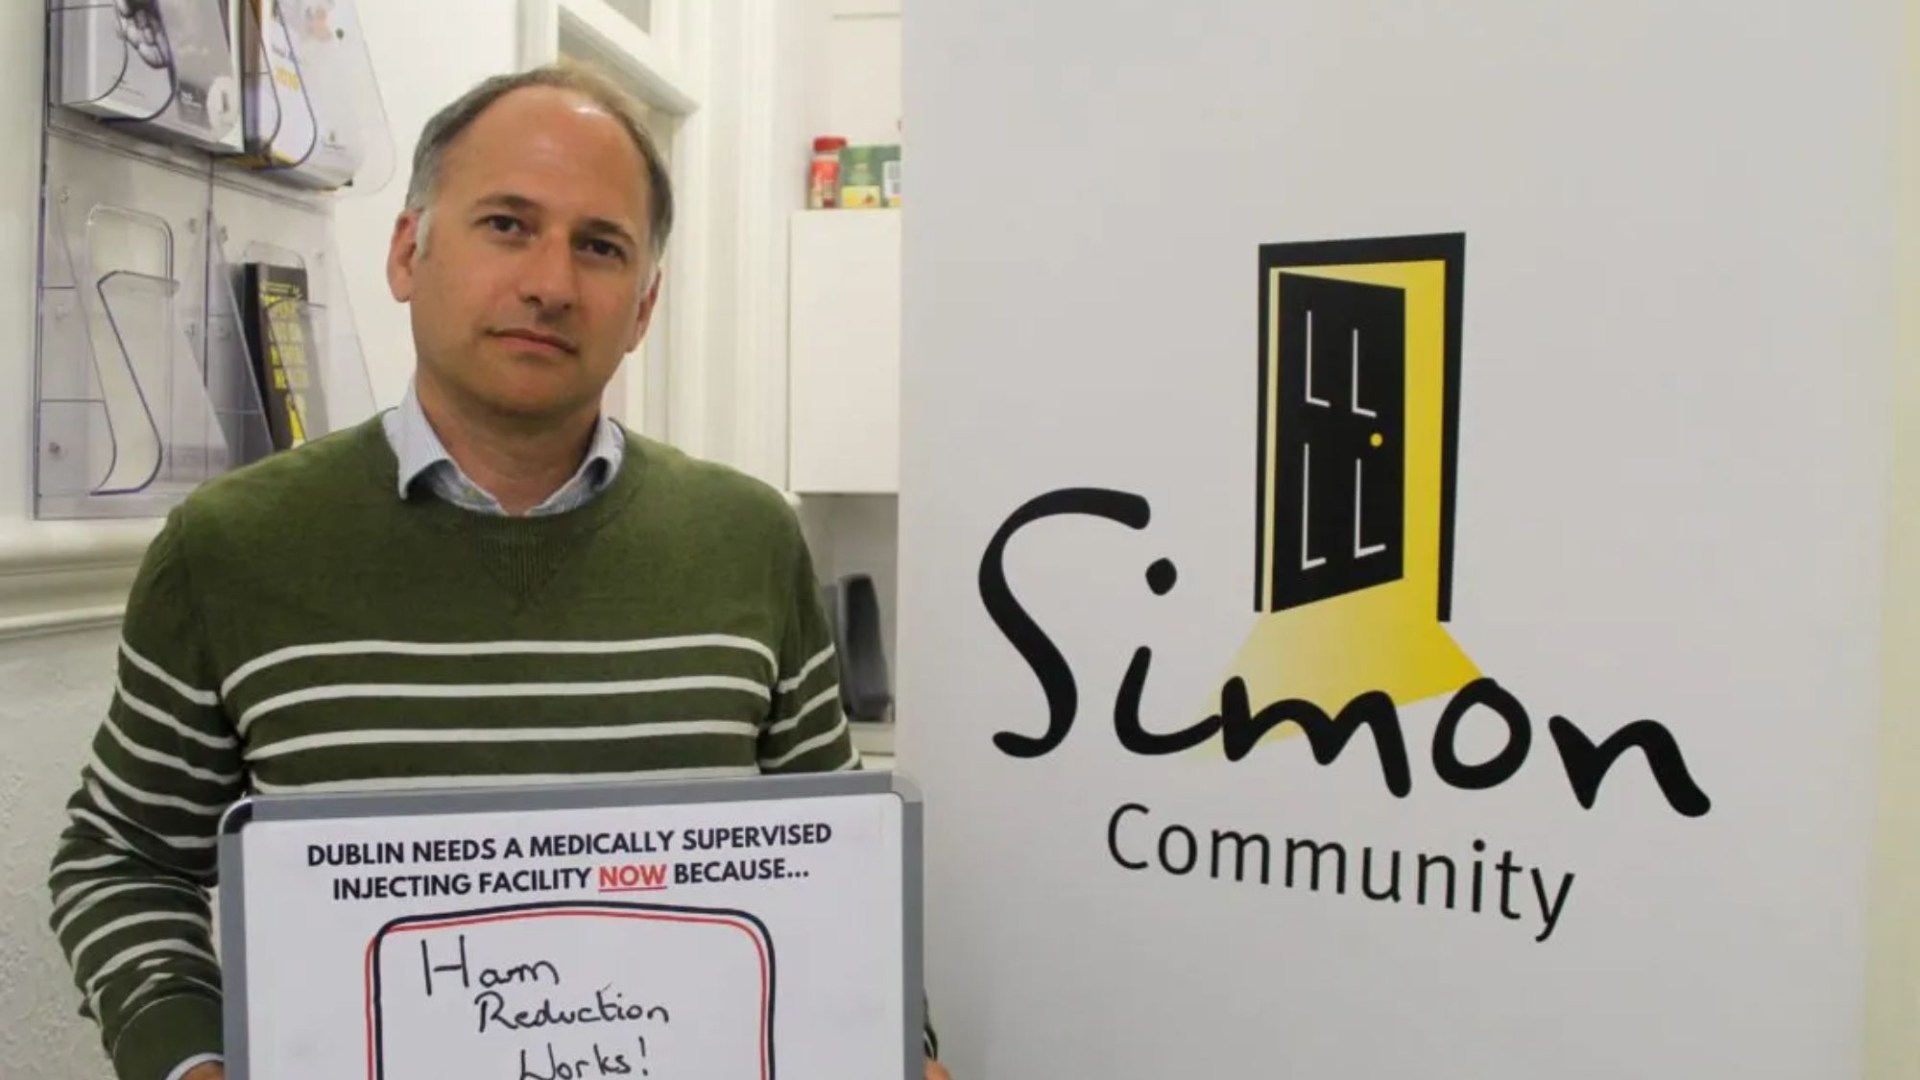 The answer is more progress on affordable housing, says Simon Community